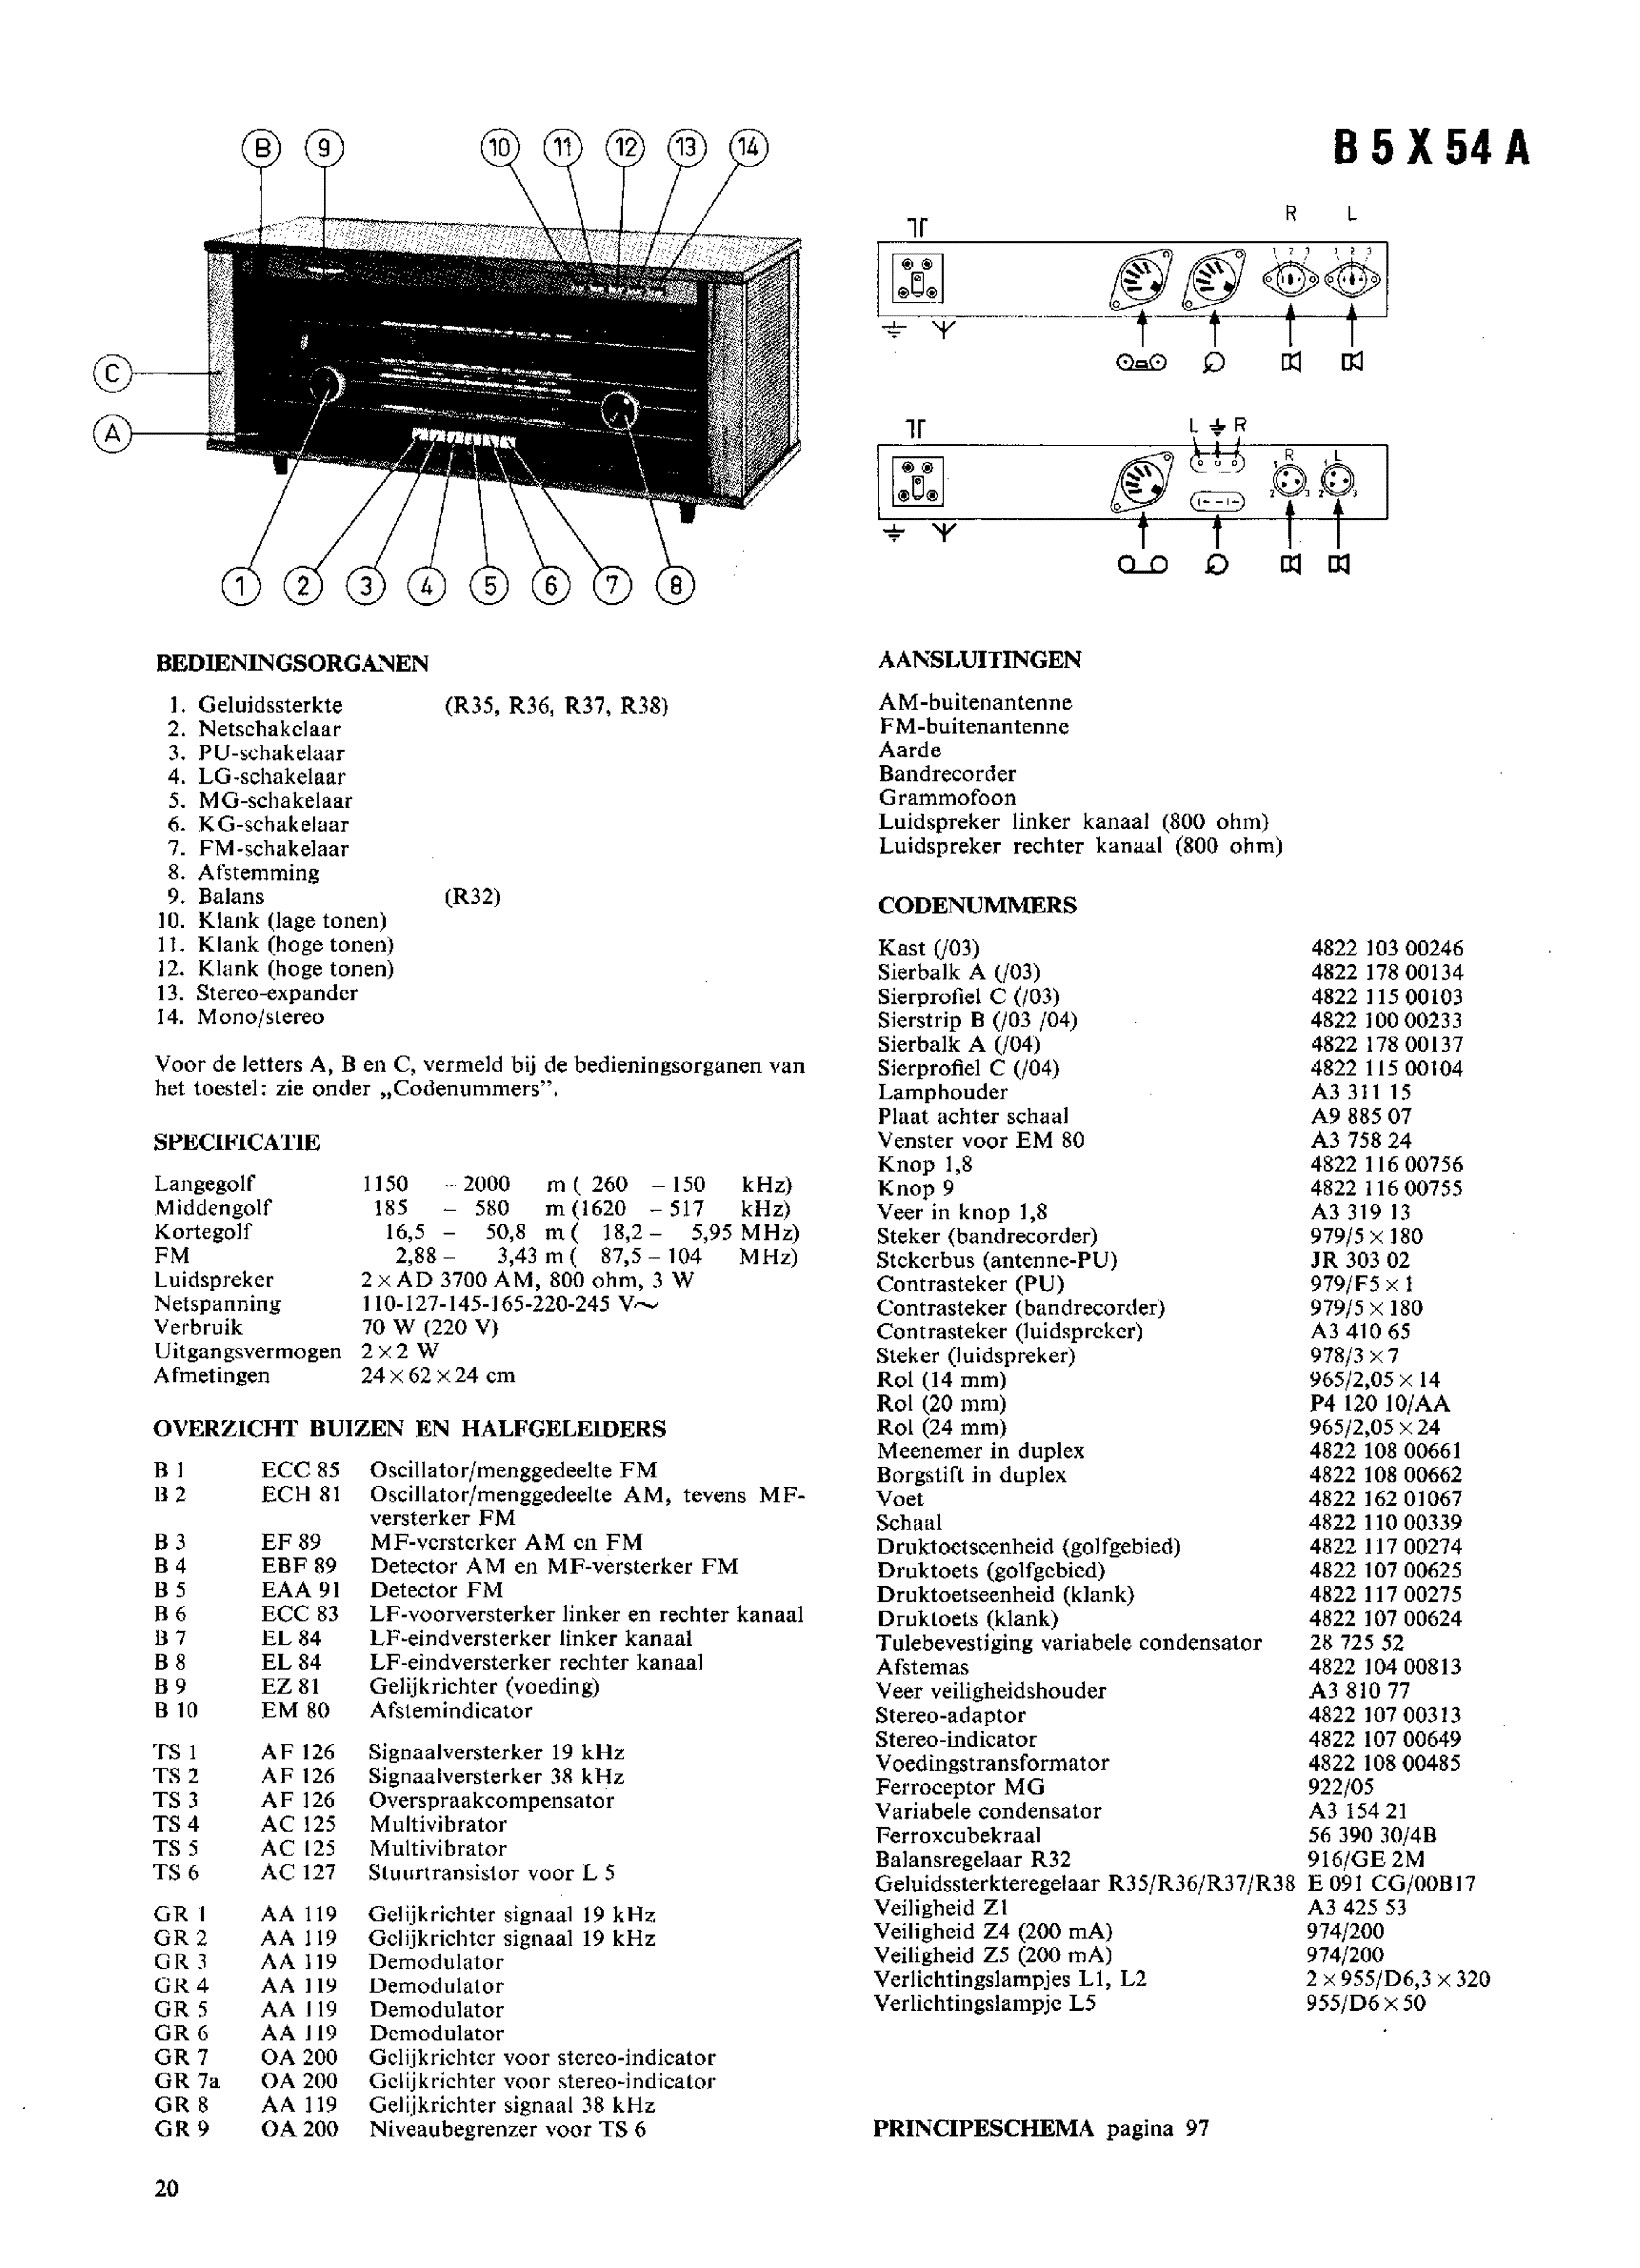 PHILIPS B5X54A SM service manual (1st page)